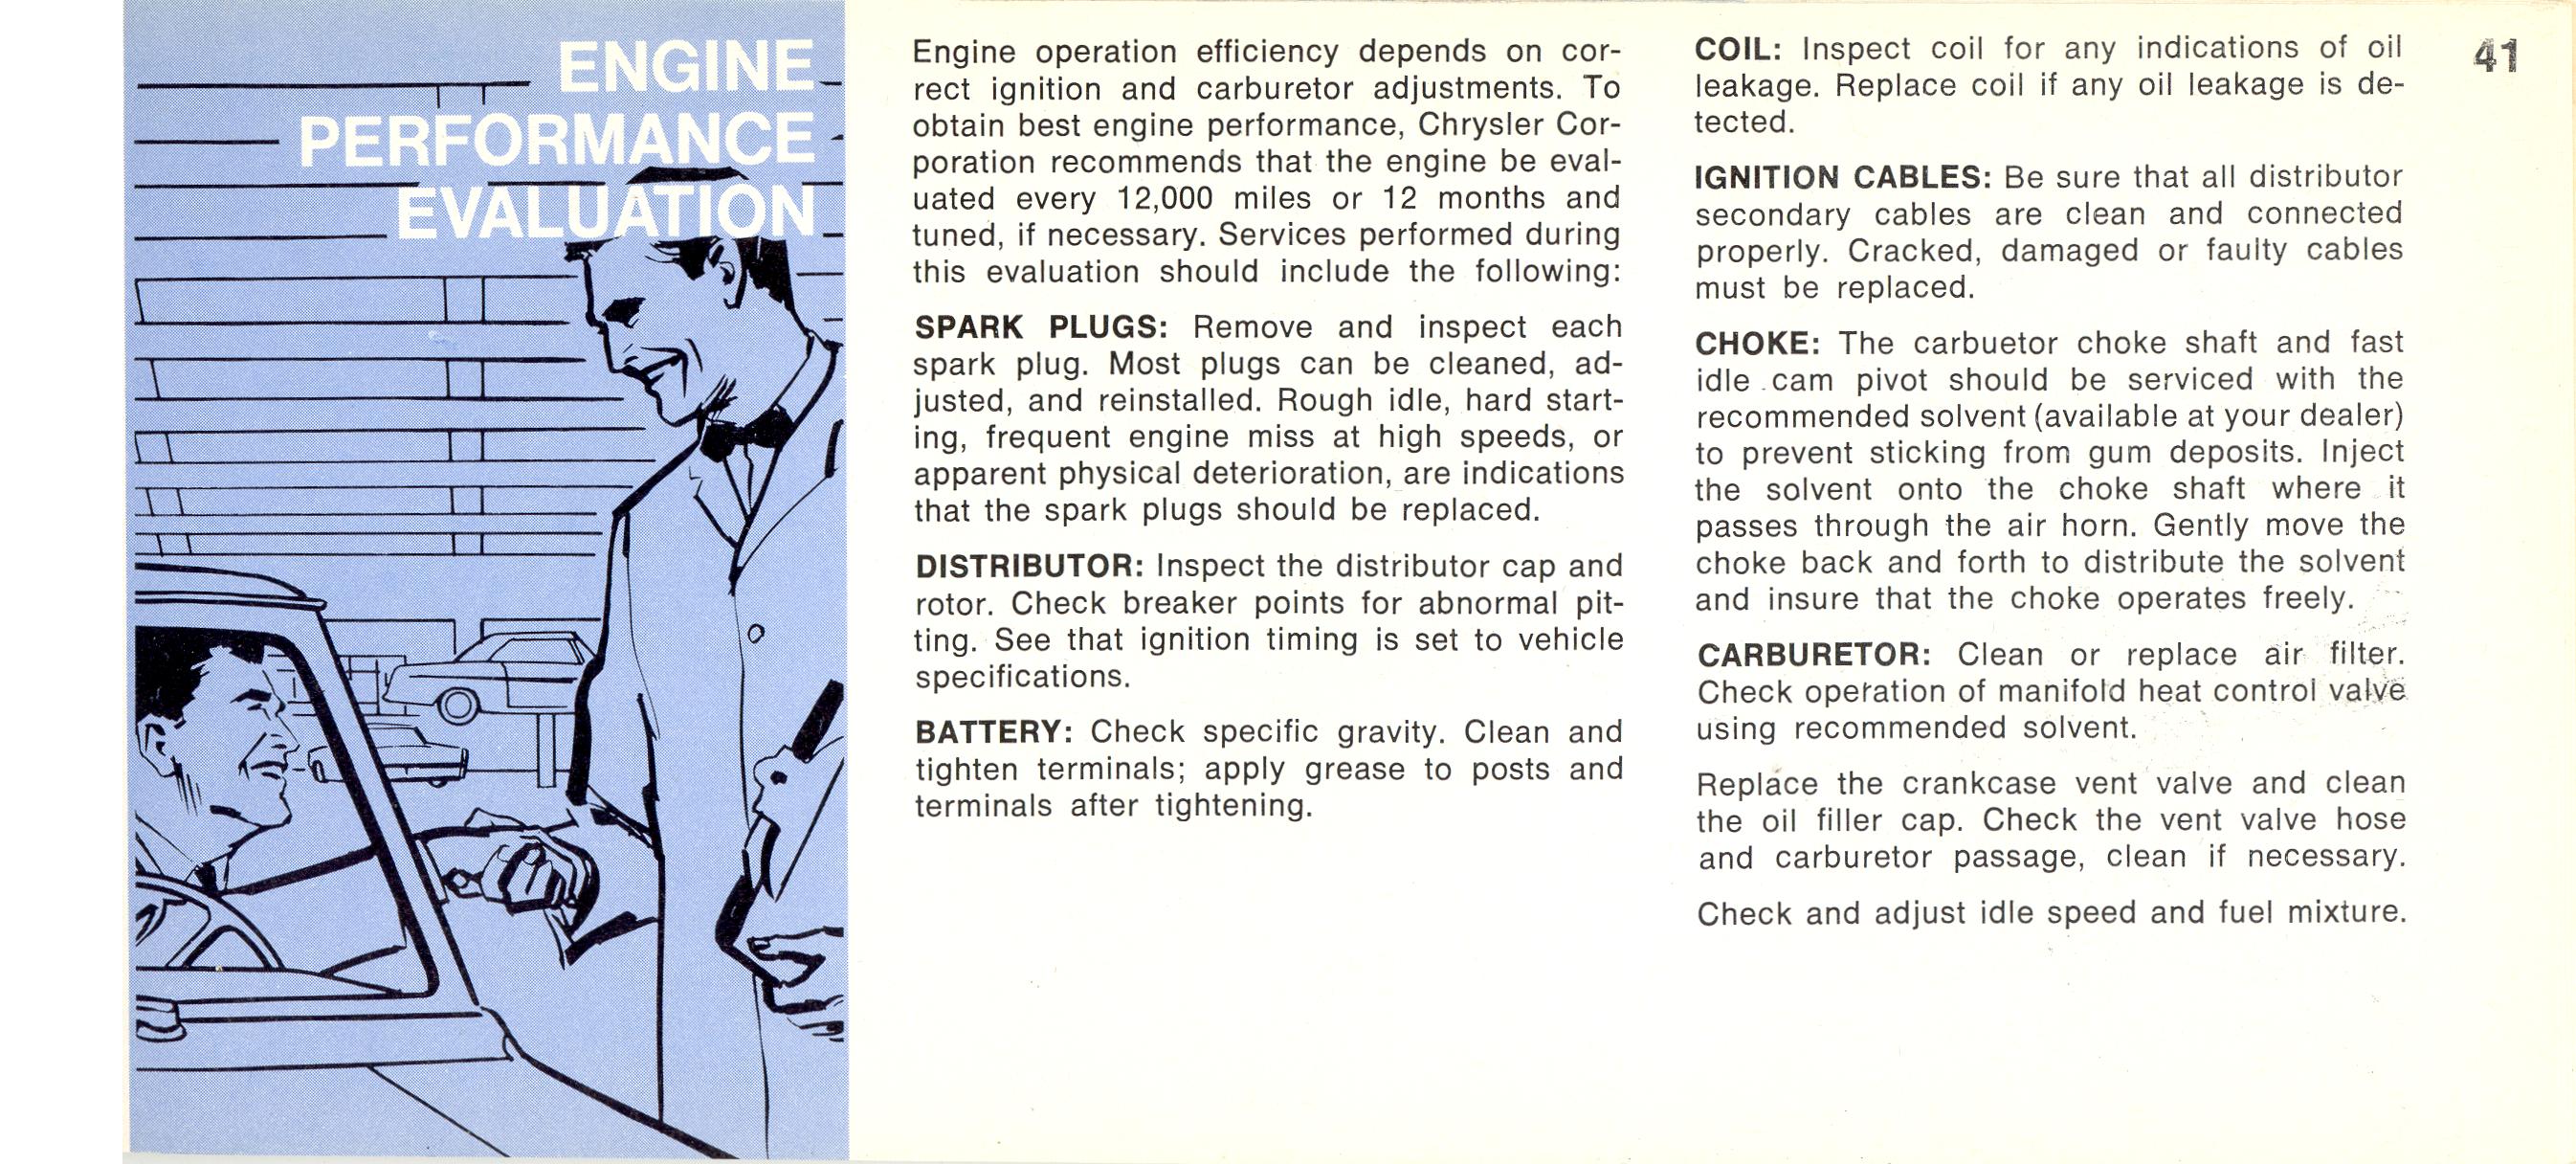 1968 Chrysler Imperial Owners Manual Page 29